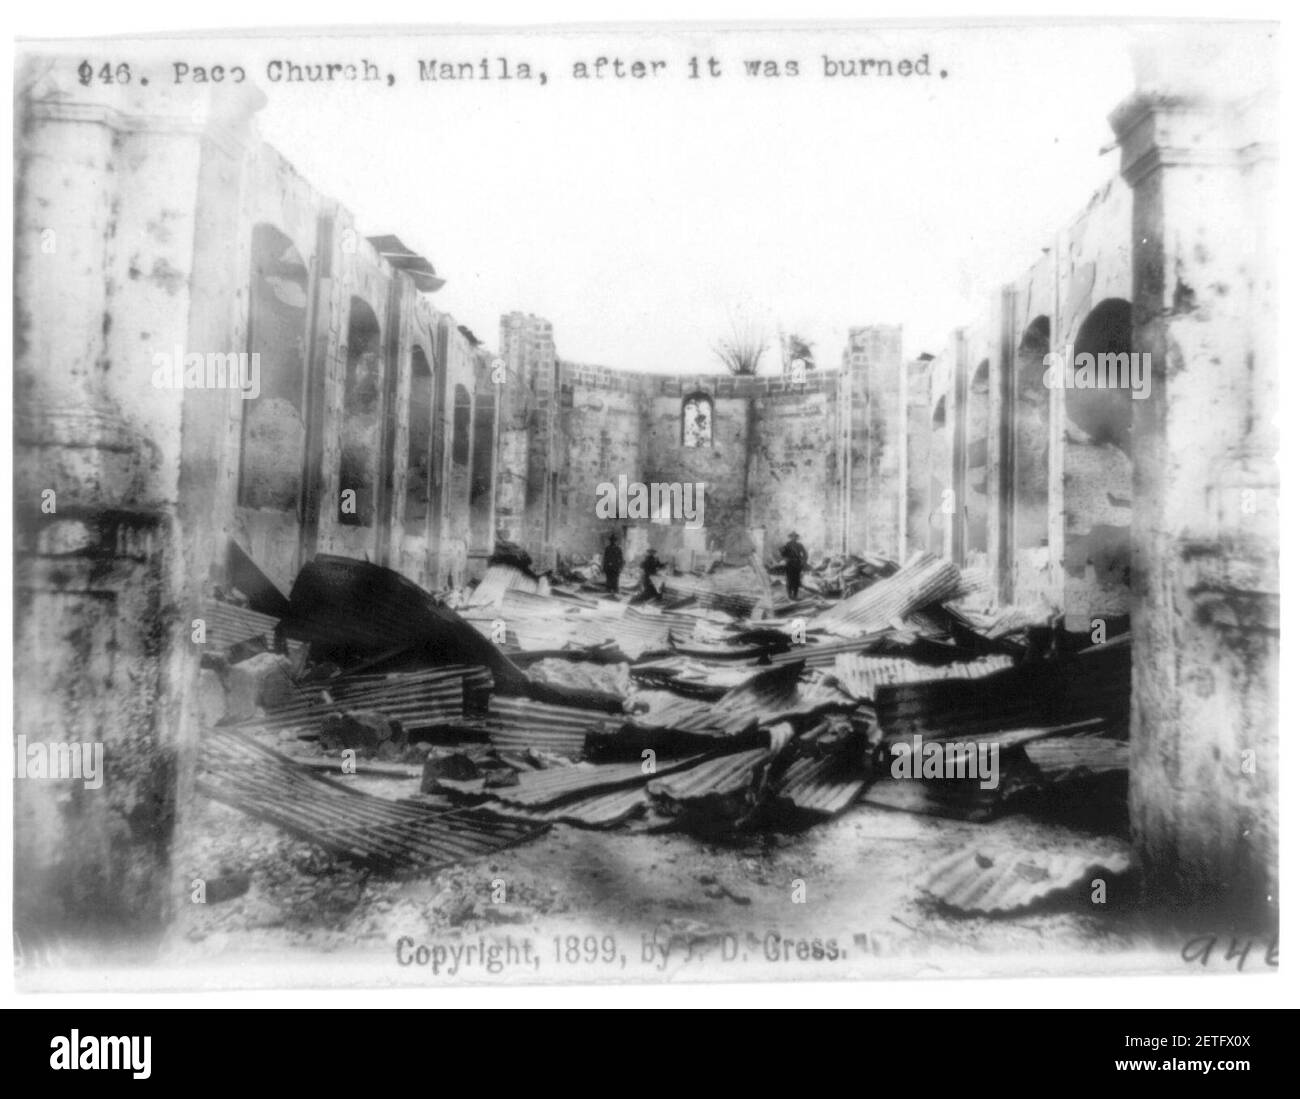 Philippine Islands)- Paco Church, Manila, after it was burned Stock Photo